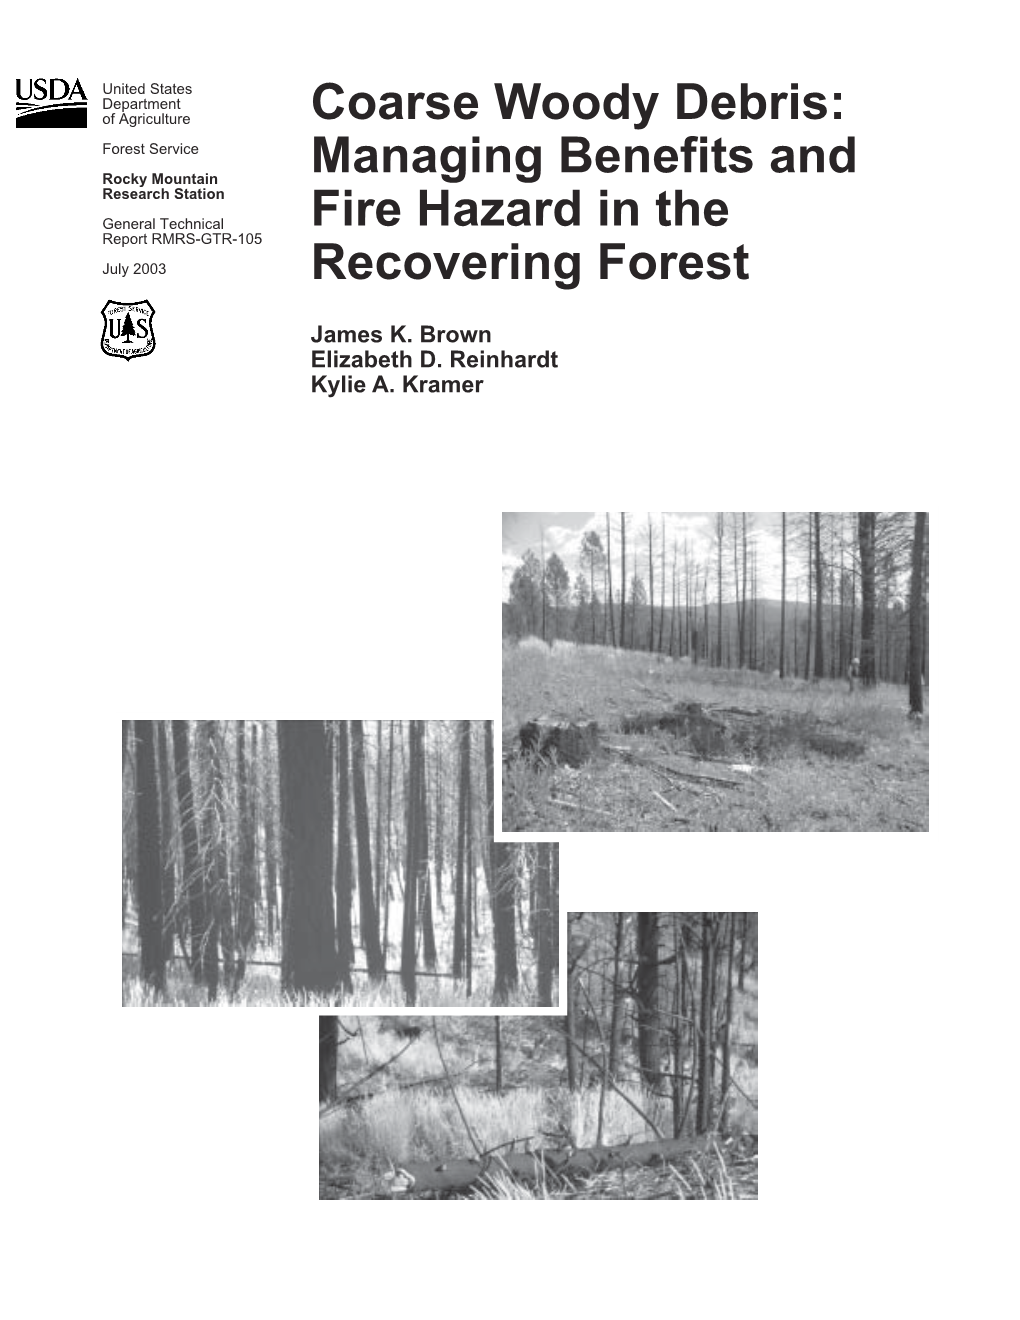 Coarse Woody Debris: Managing Benefits and Fire Hazard in the Recovering Forest